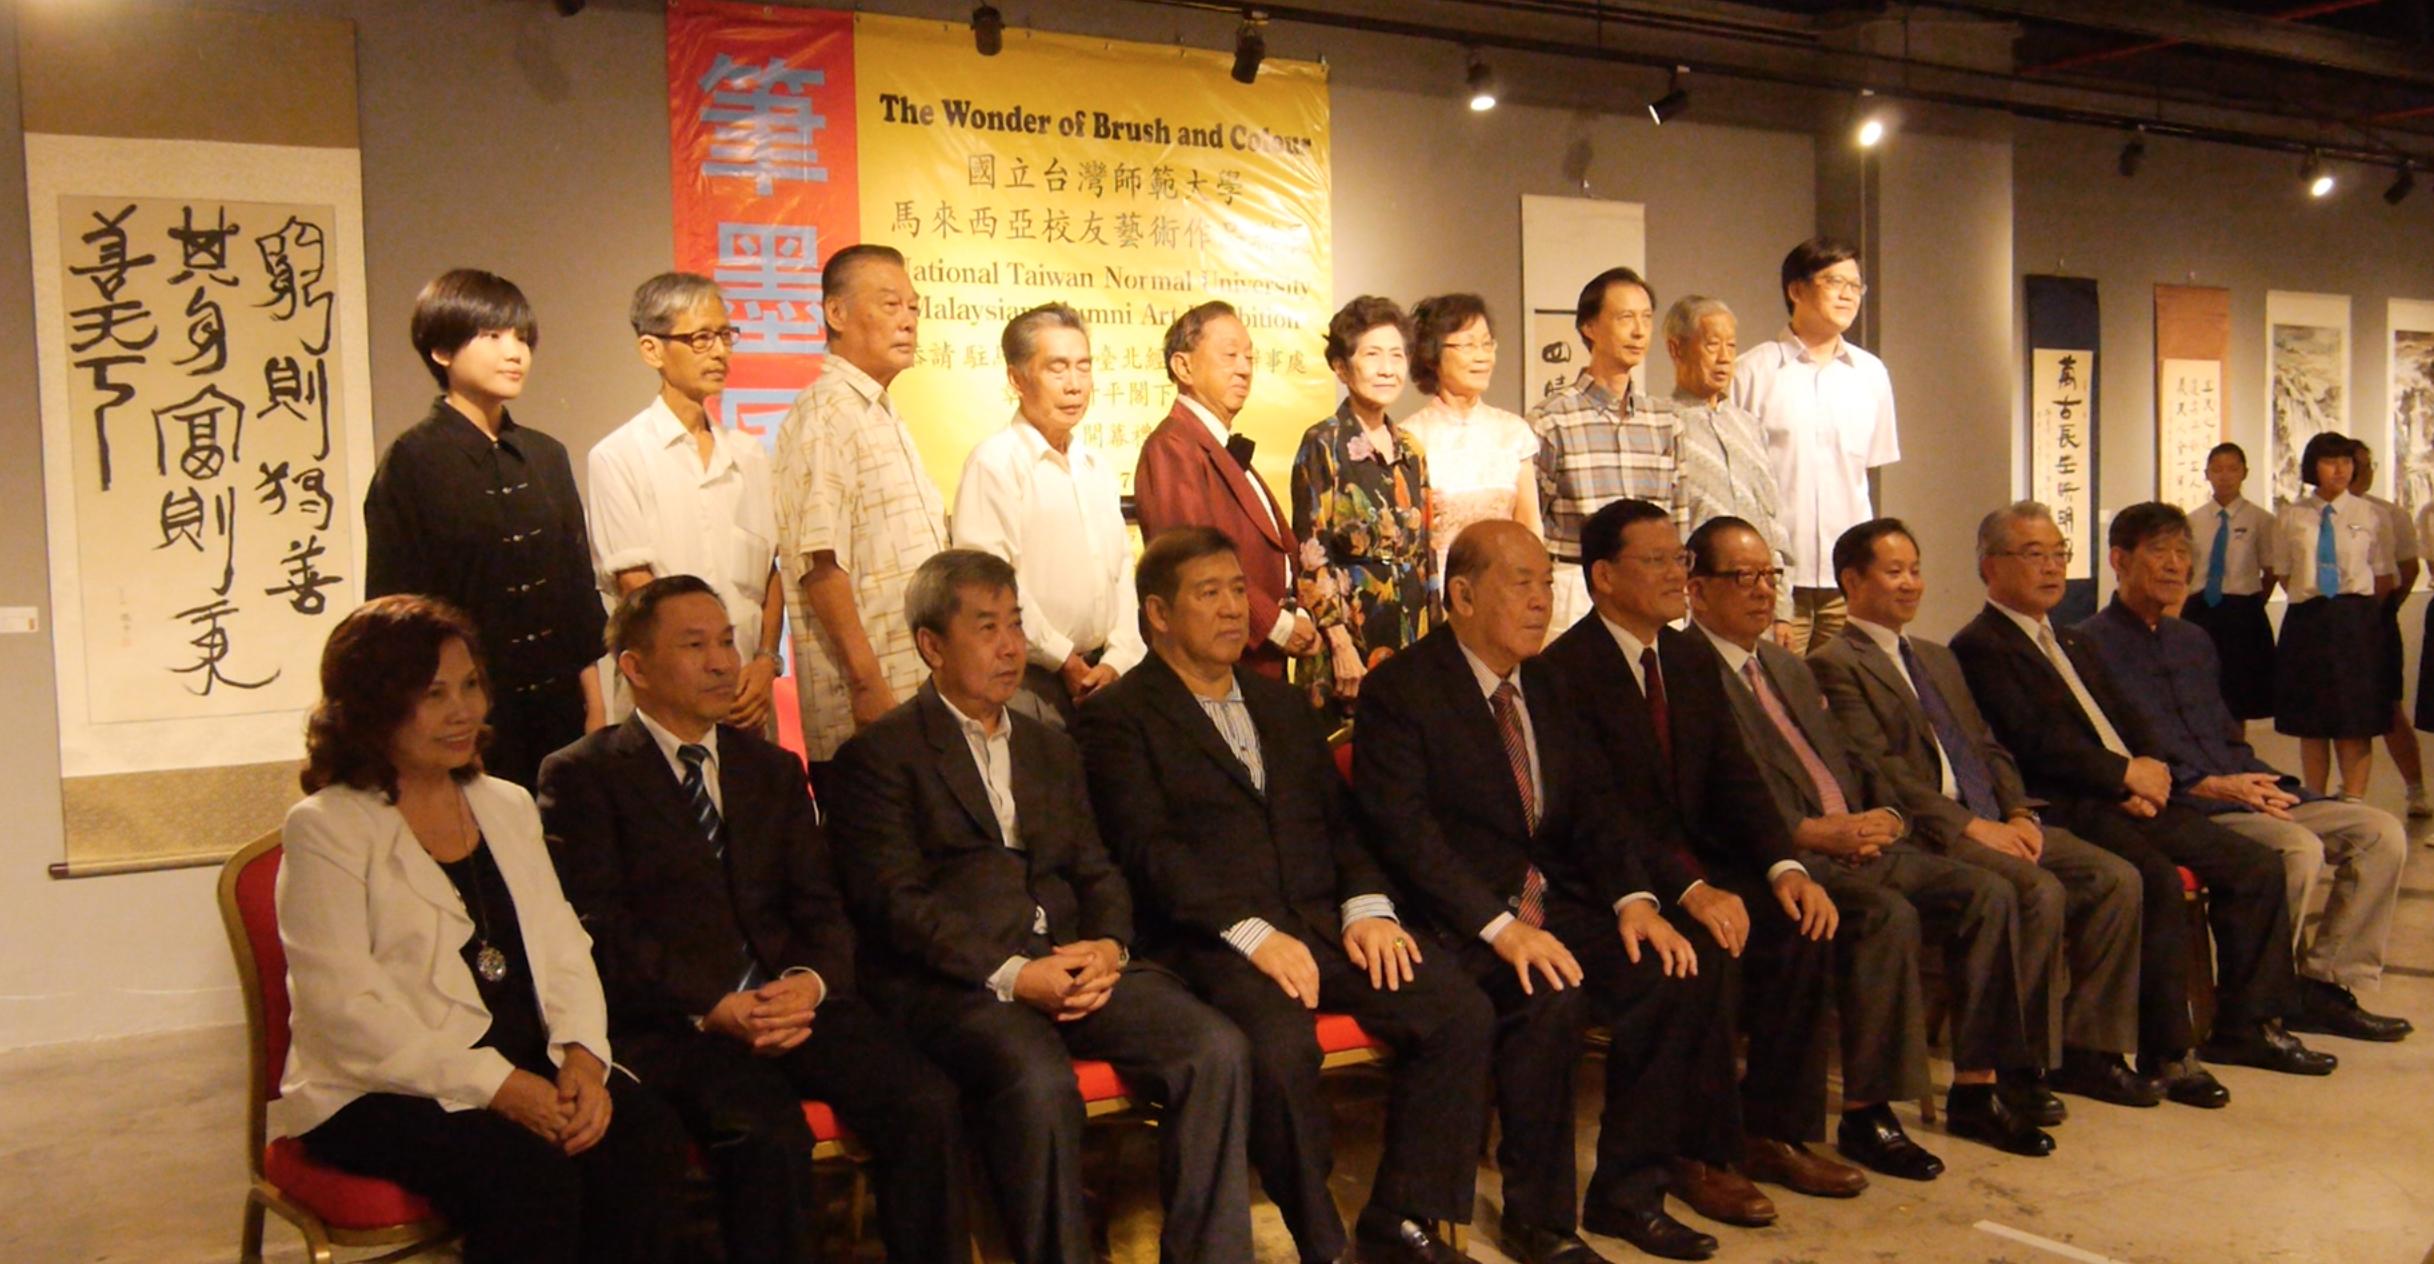 Representative Chang,  James Chi- ping (front row left six), Chairman of the Board of Directors of Ytl Group  Yeoh Tiong Lay (front row right fourth) take photo with VIP.
